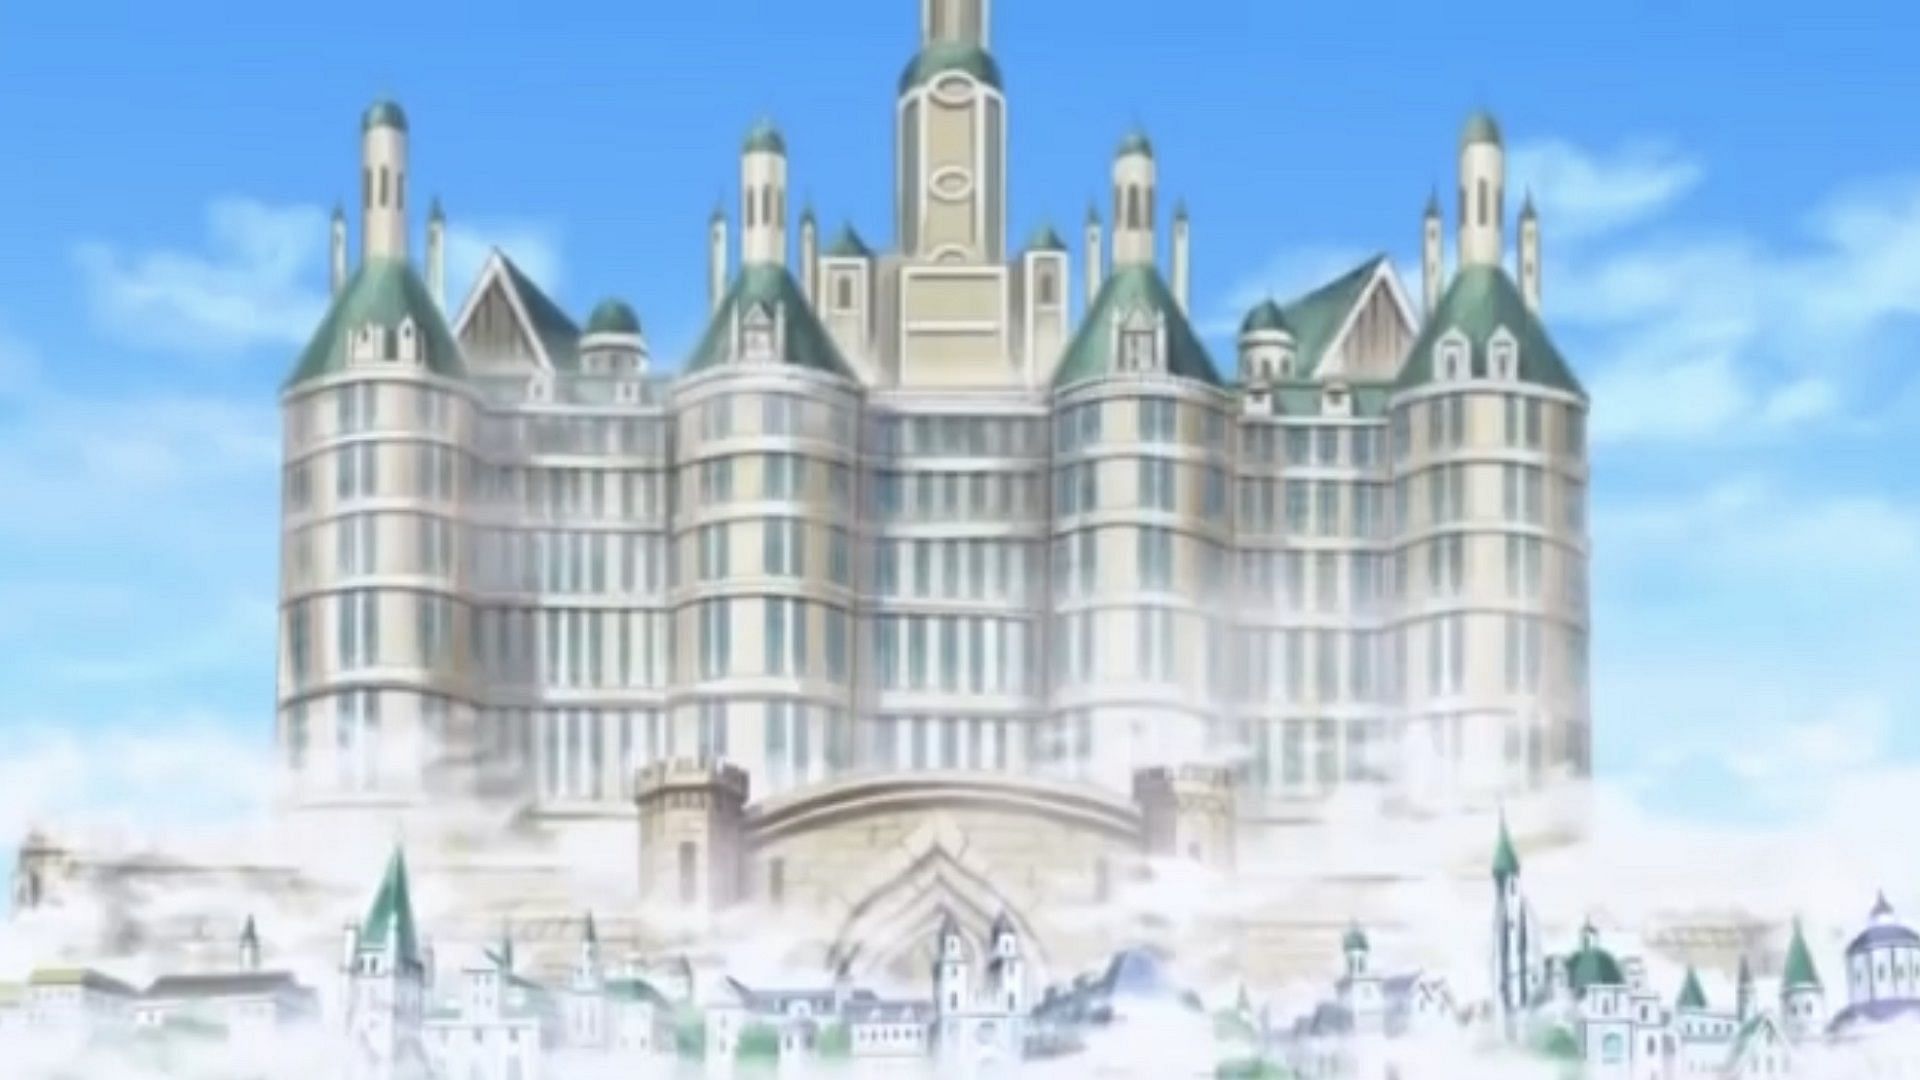 The Pangaea Castle in the Holy Land of Mary Geoise (Image via Toei Animation, One Piece)